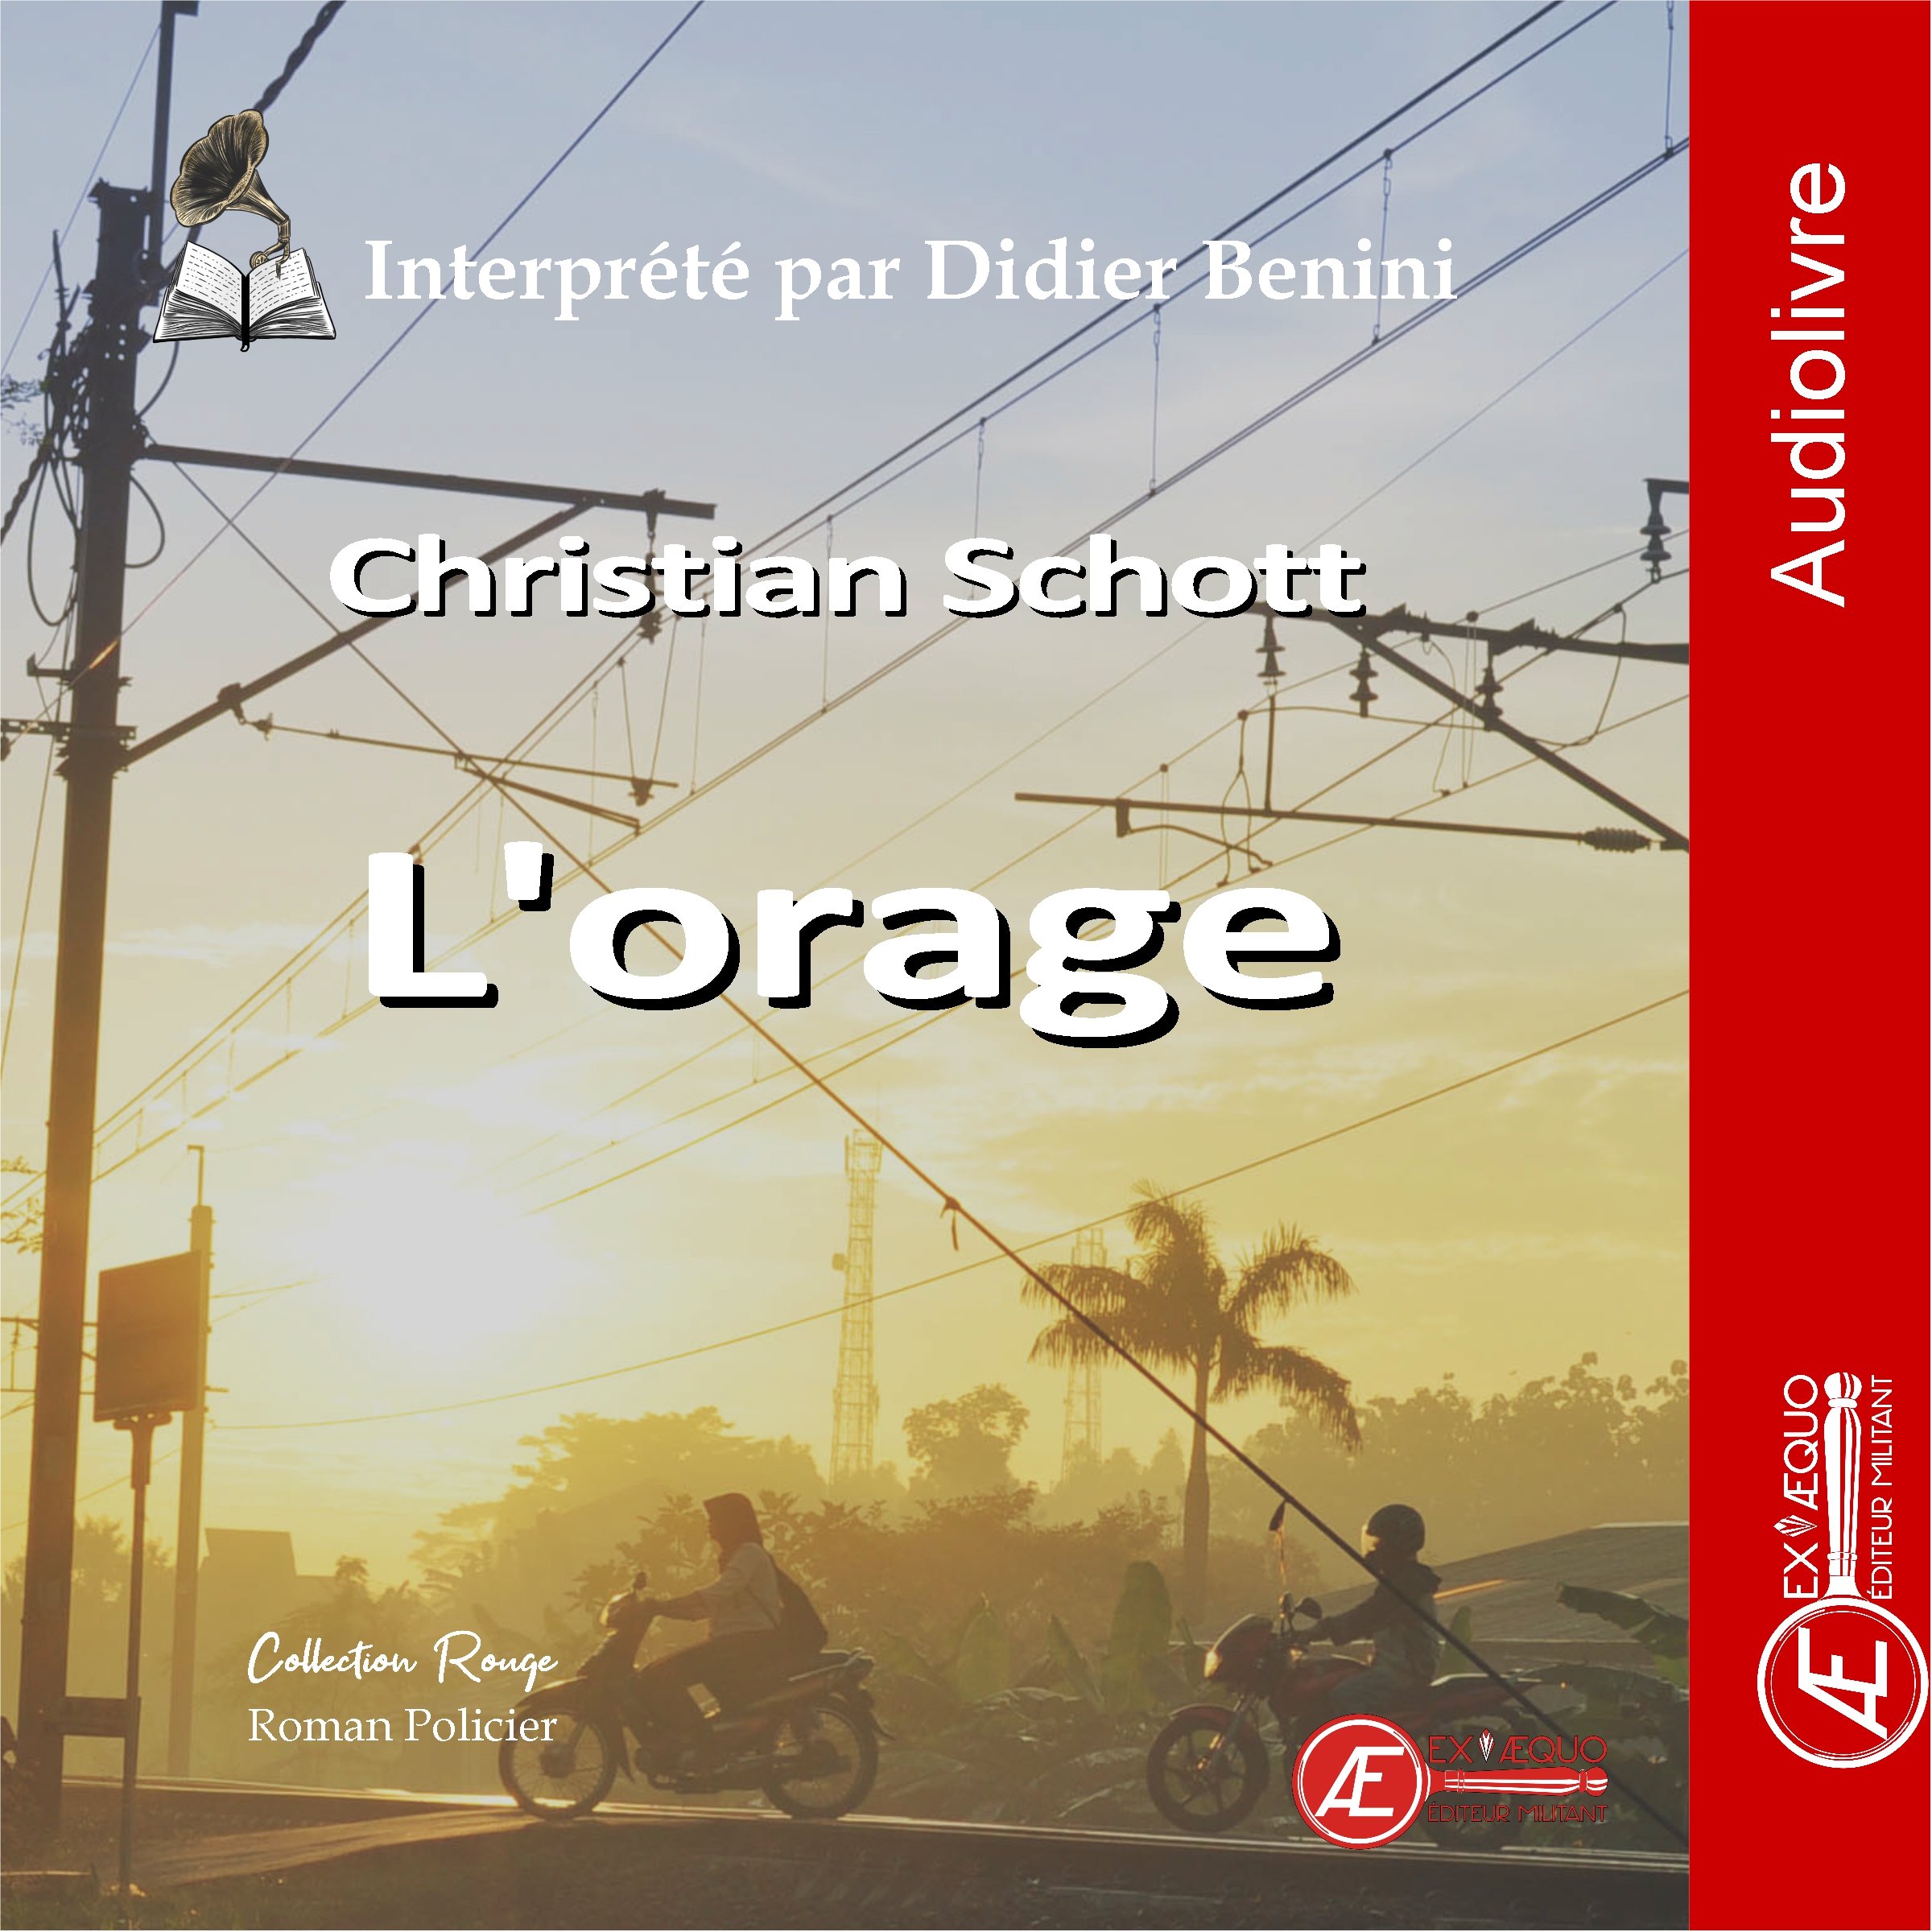 You are currently viewing L’orage – Audiolivre